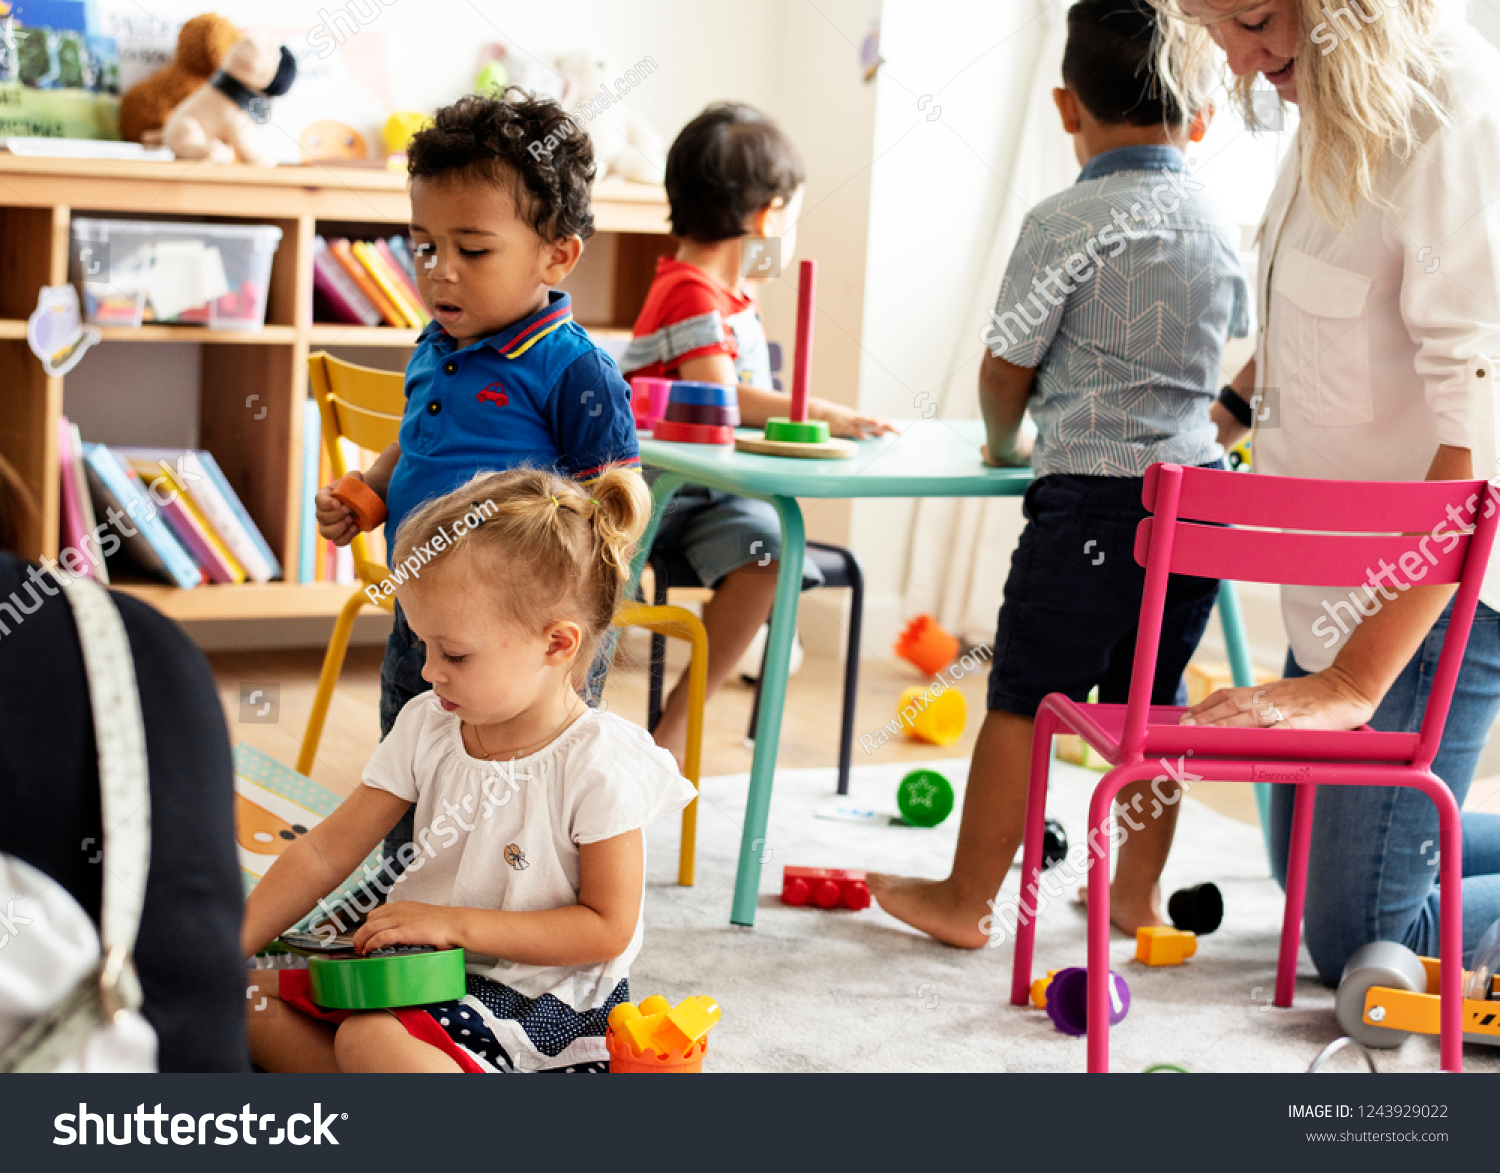 Nursery children playing with teacher in the classroom #1243929022